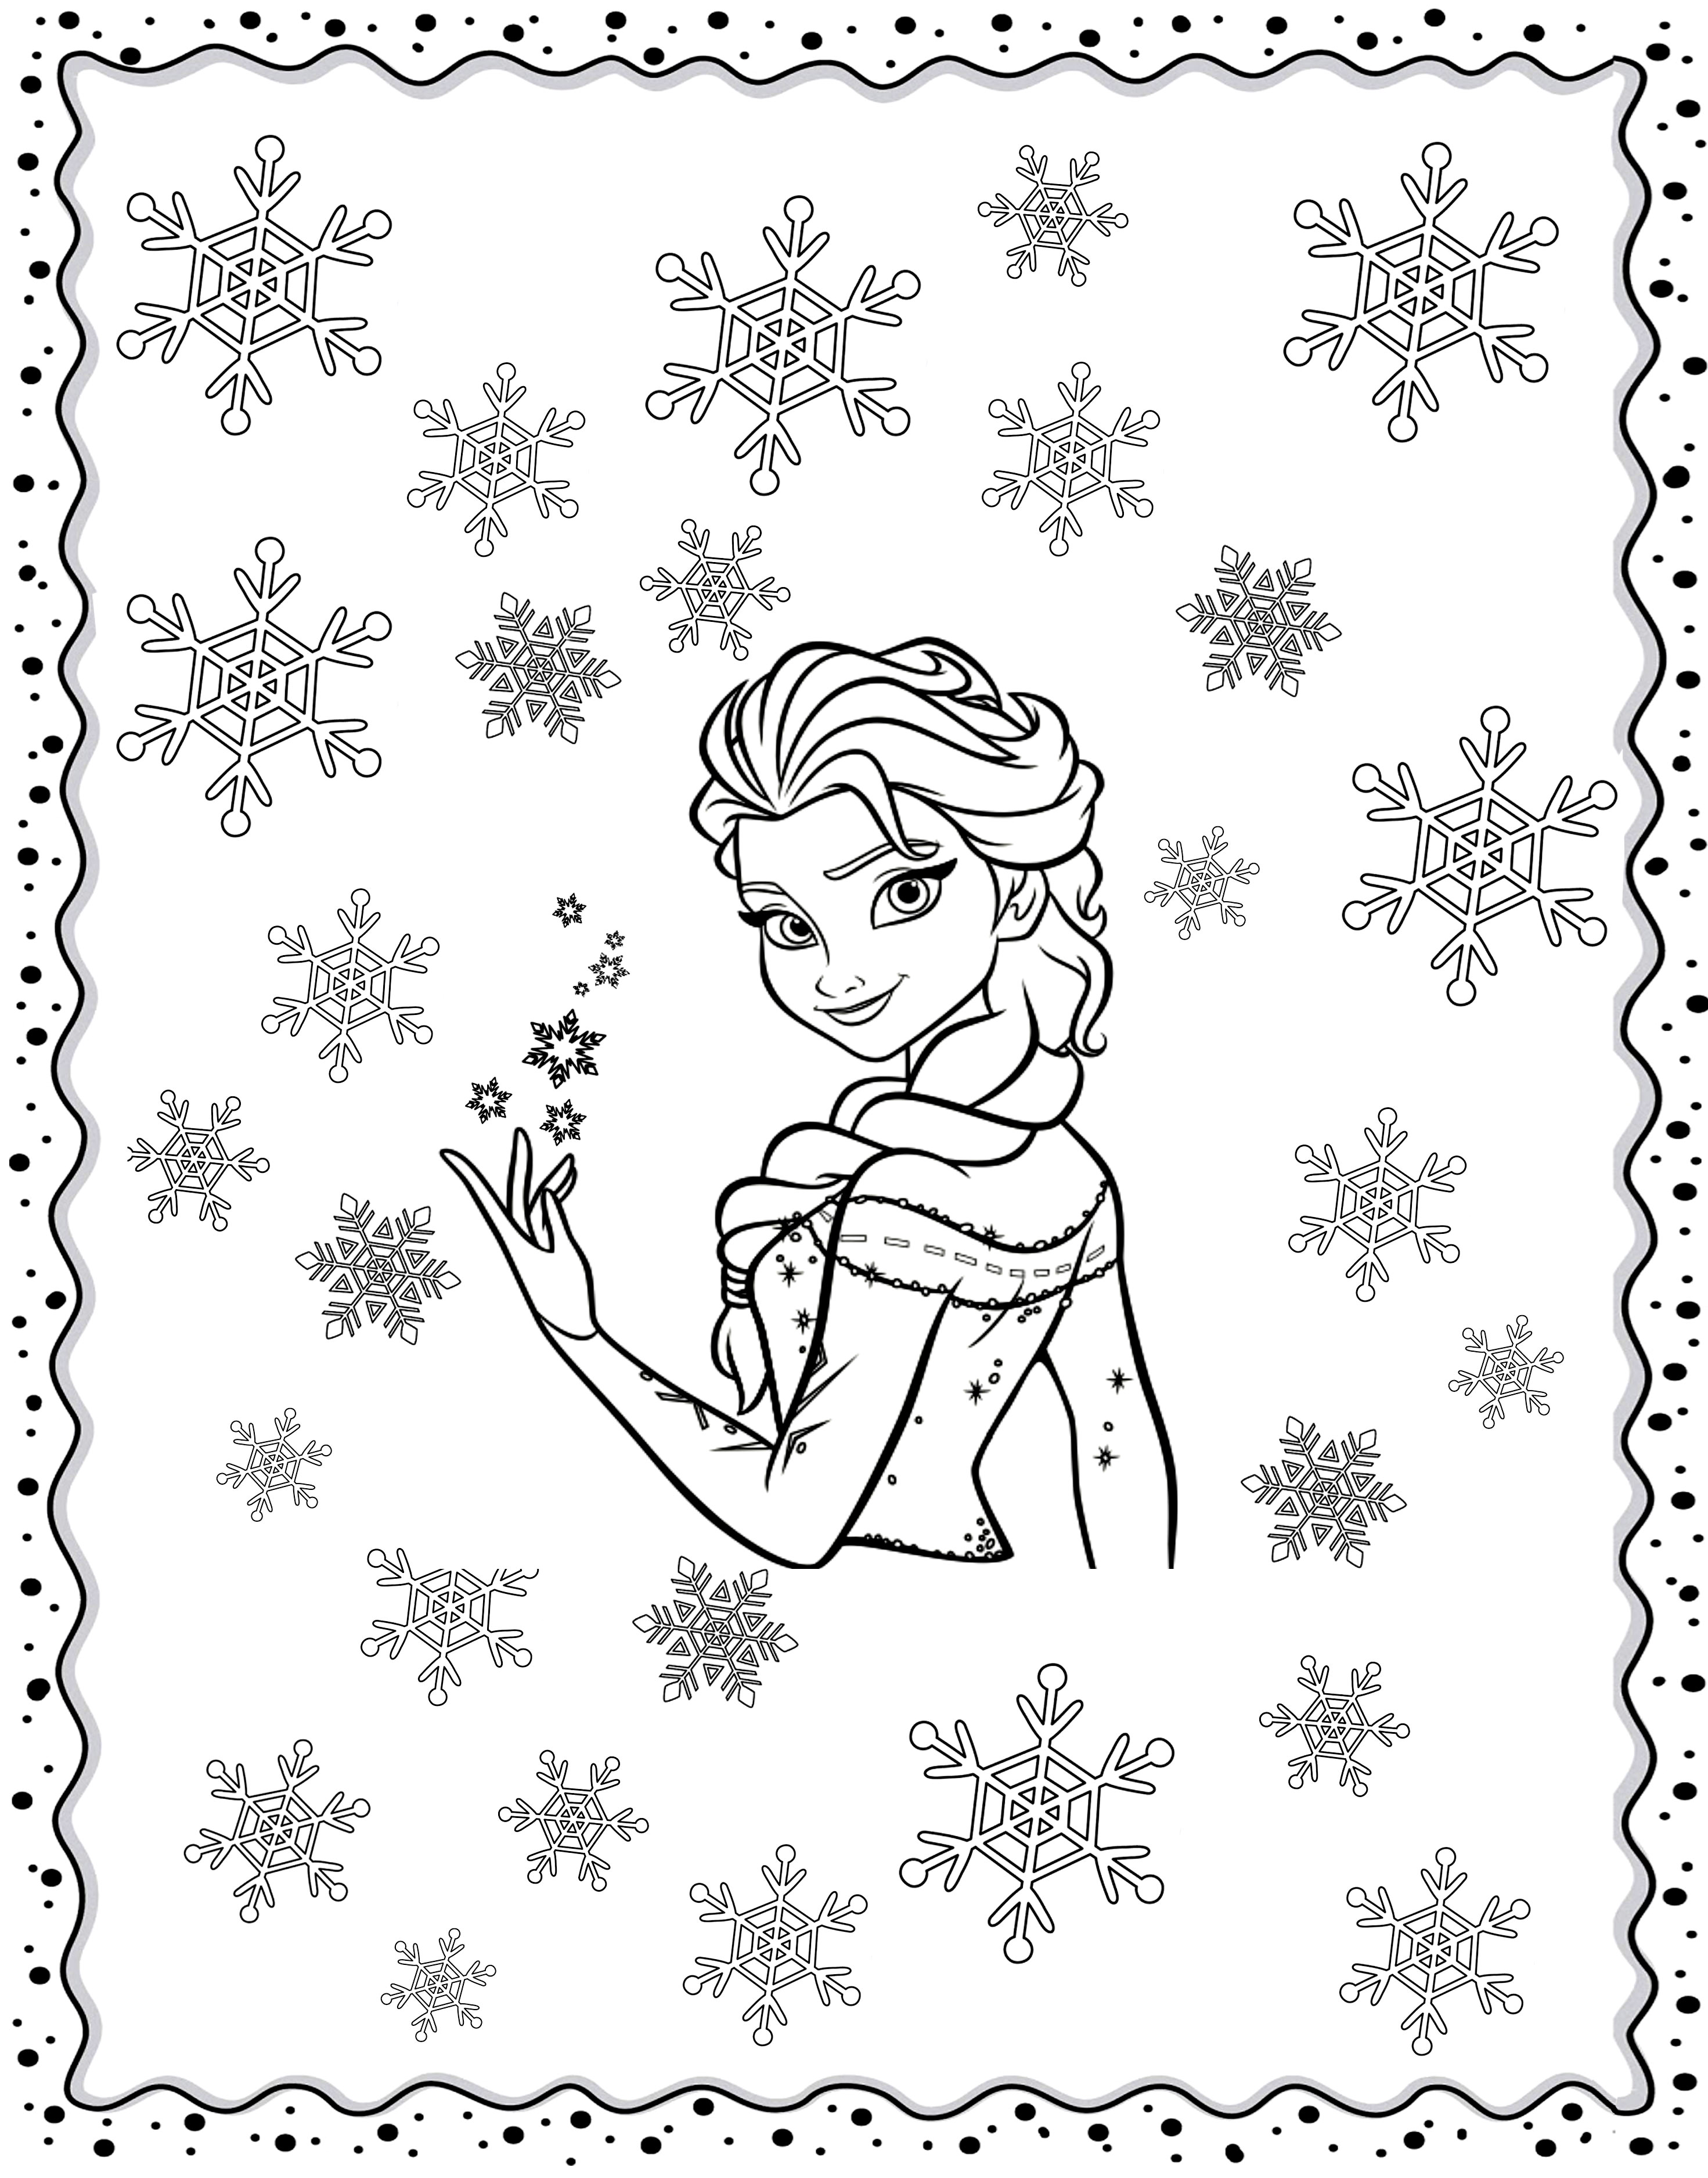 Simple Frozen coloring page for kids : Elsa and snowflakes